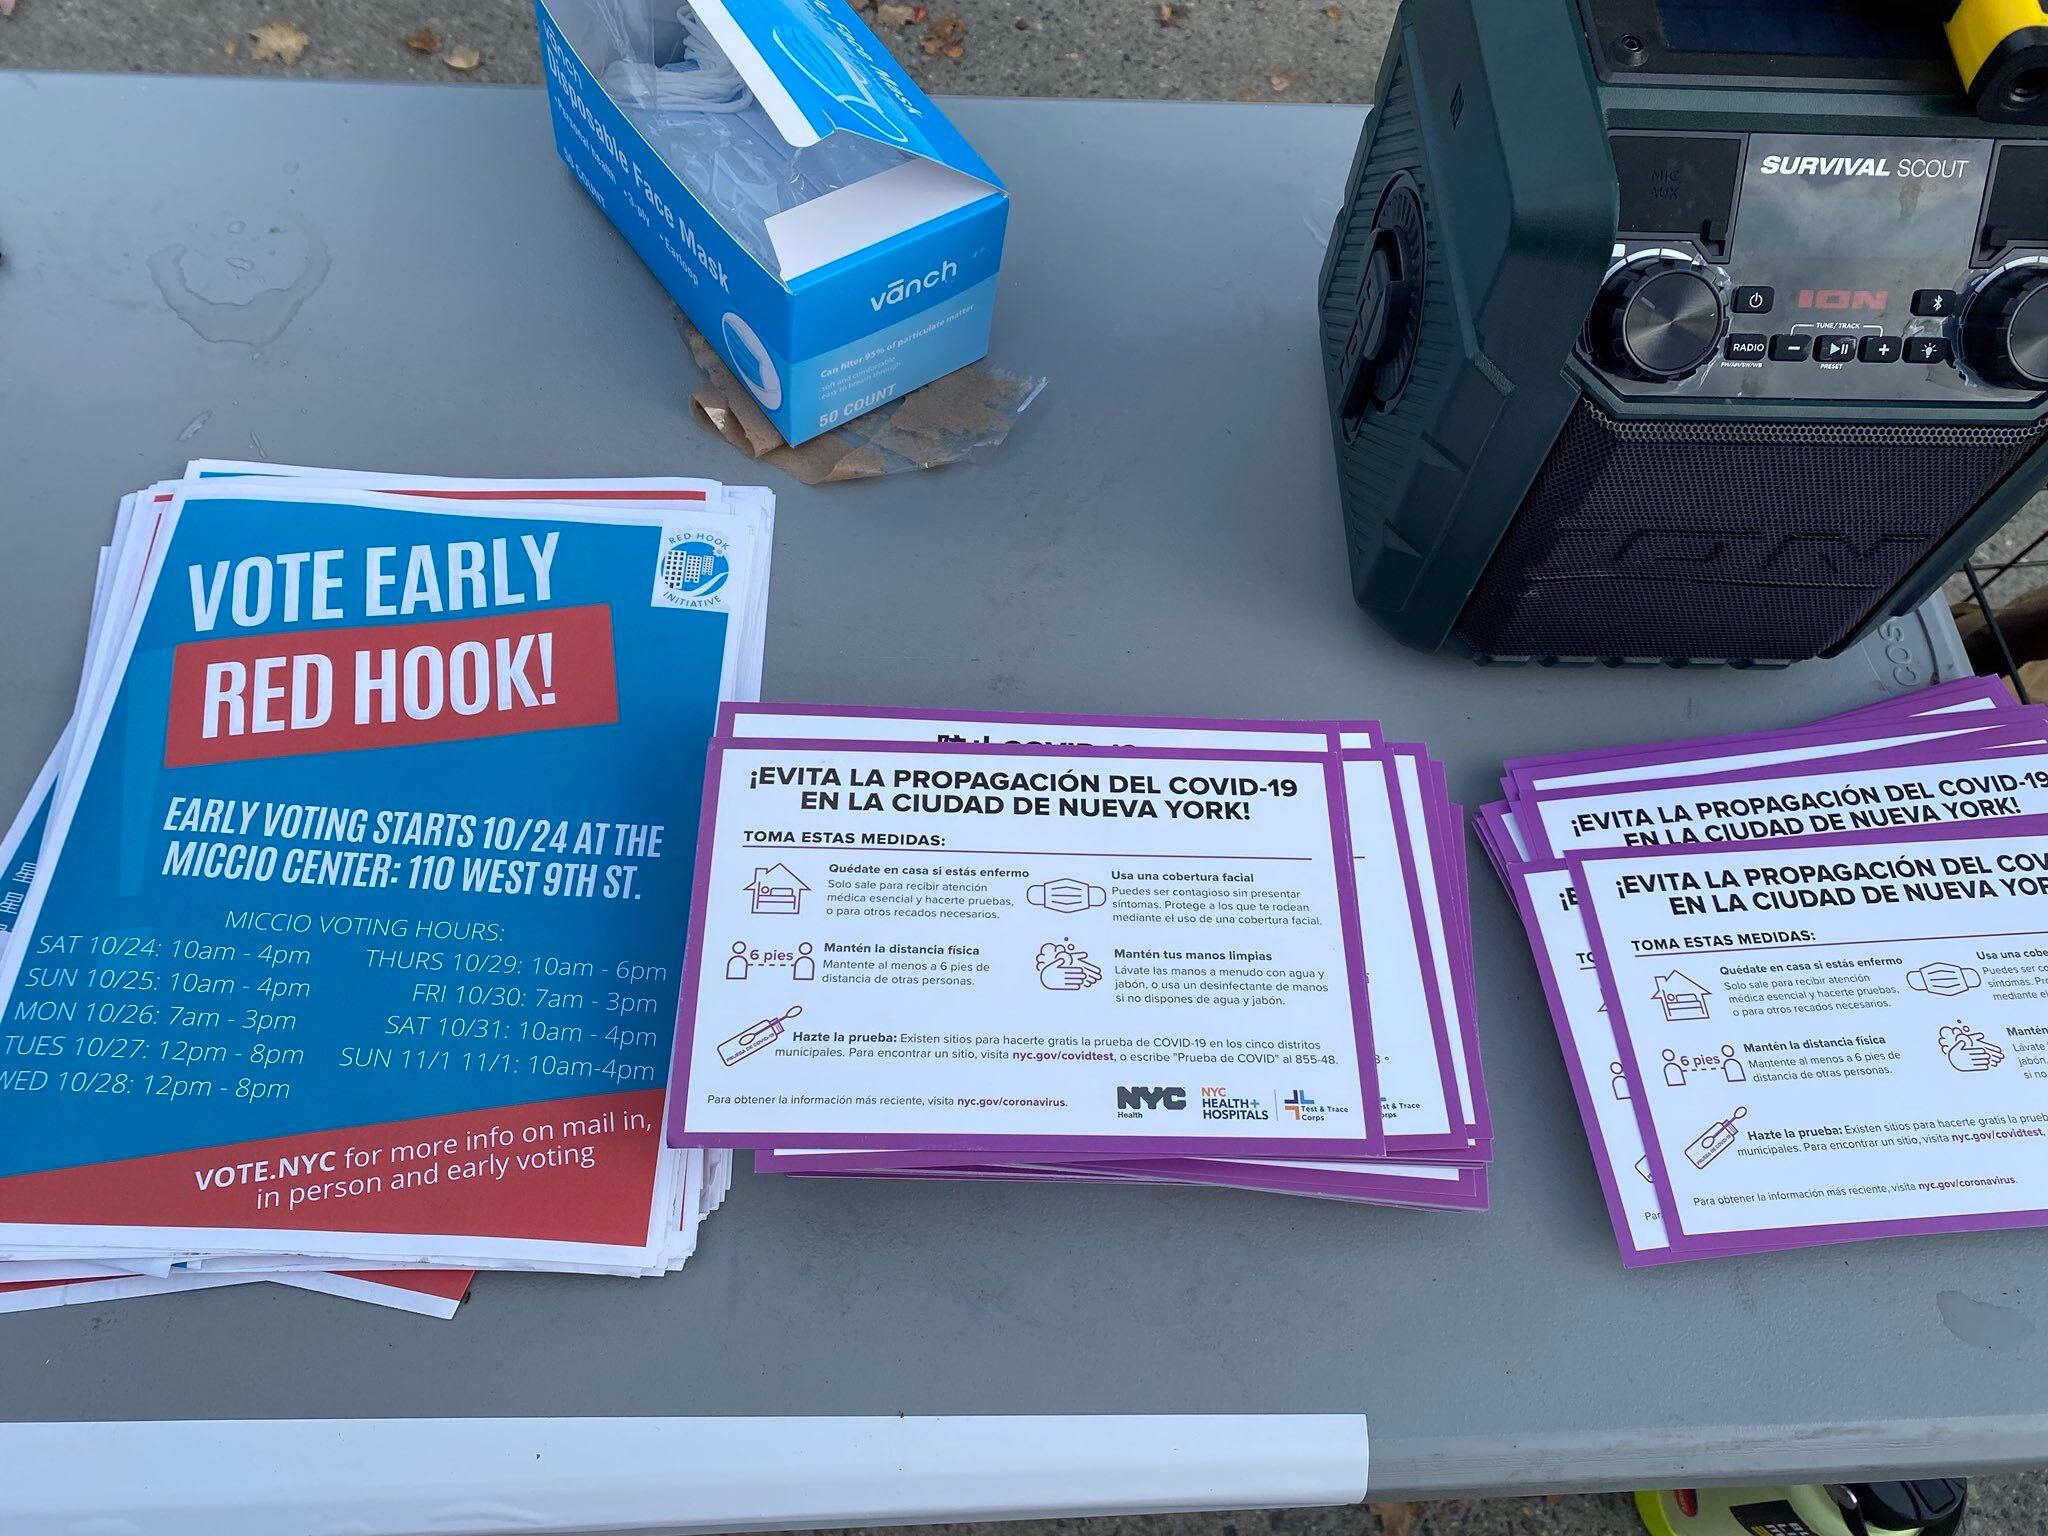 Picture of the offending table with the fliers about early voting and COVID-19.